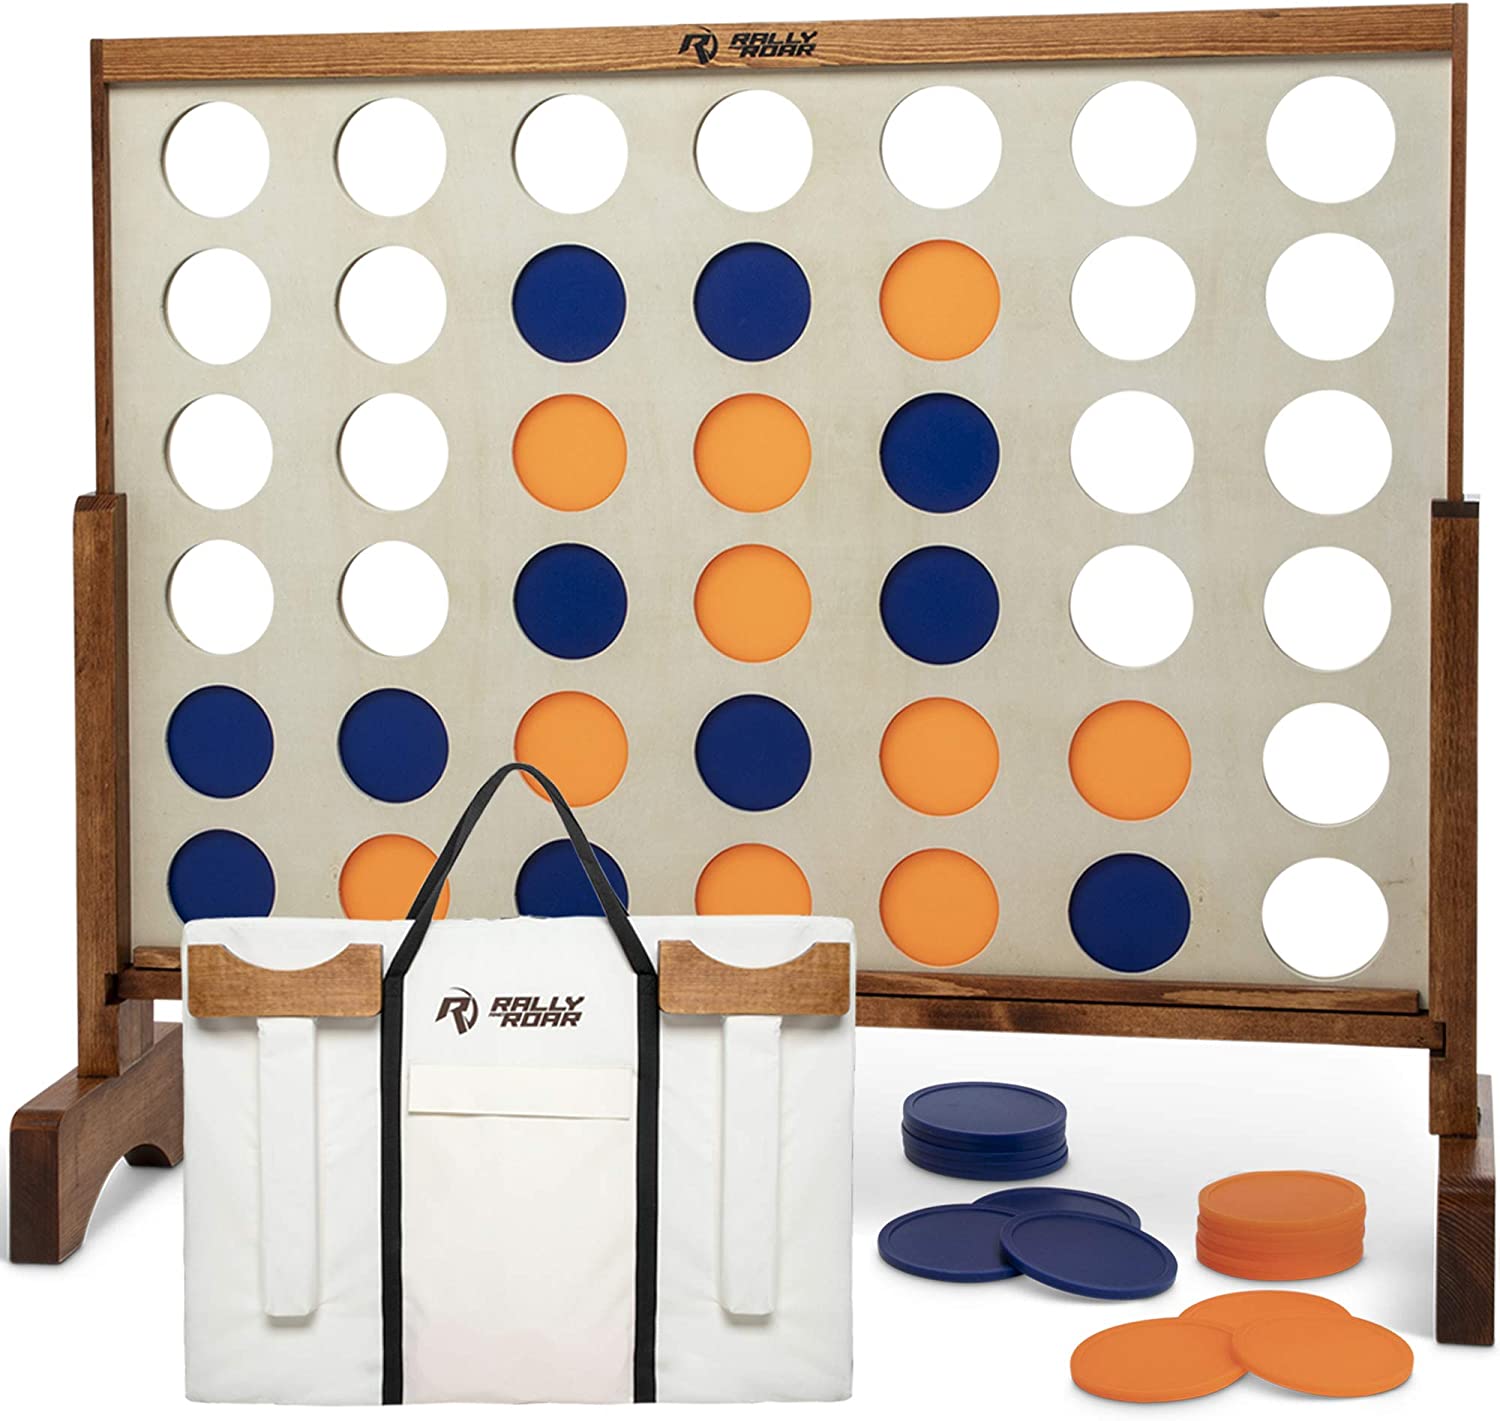 giant connect four image